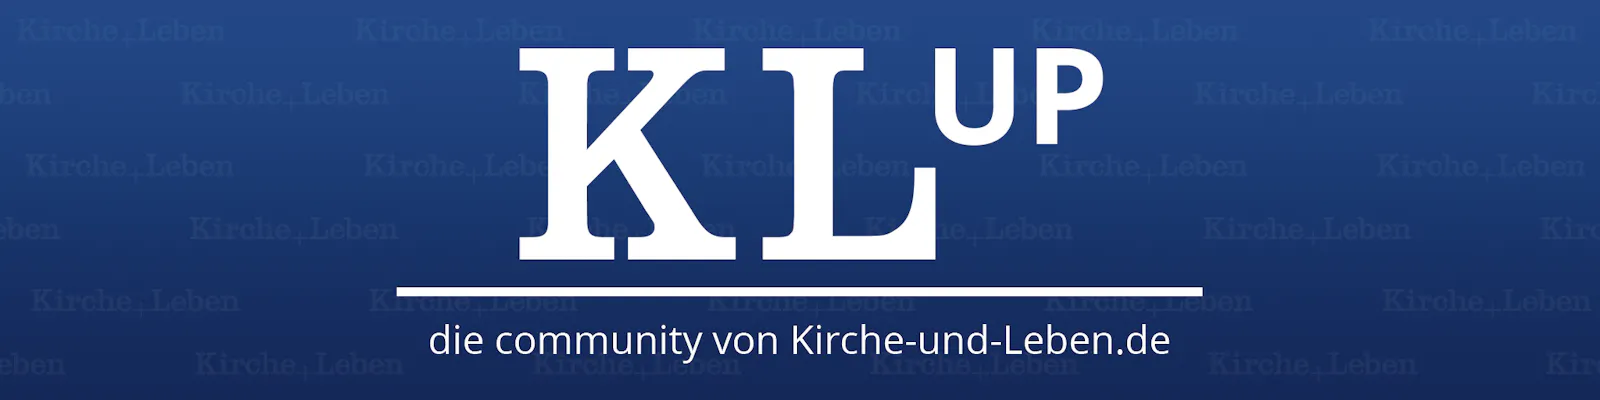 KLup-Banner